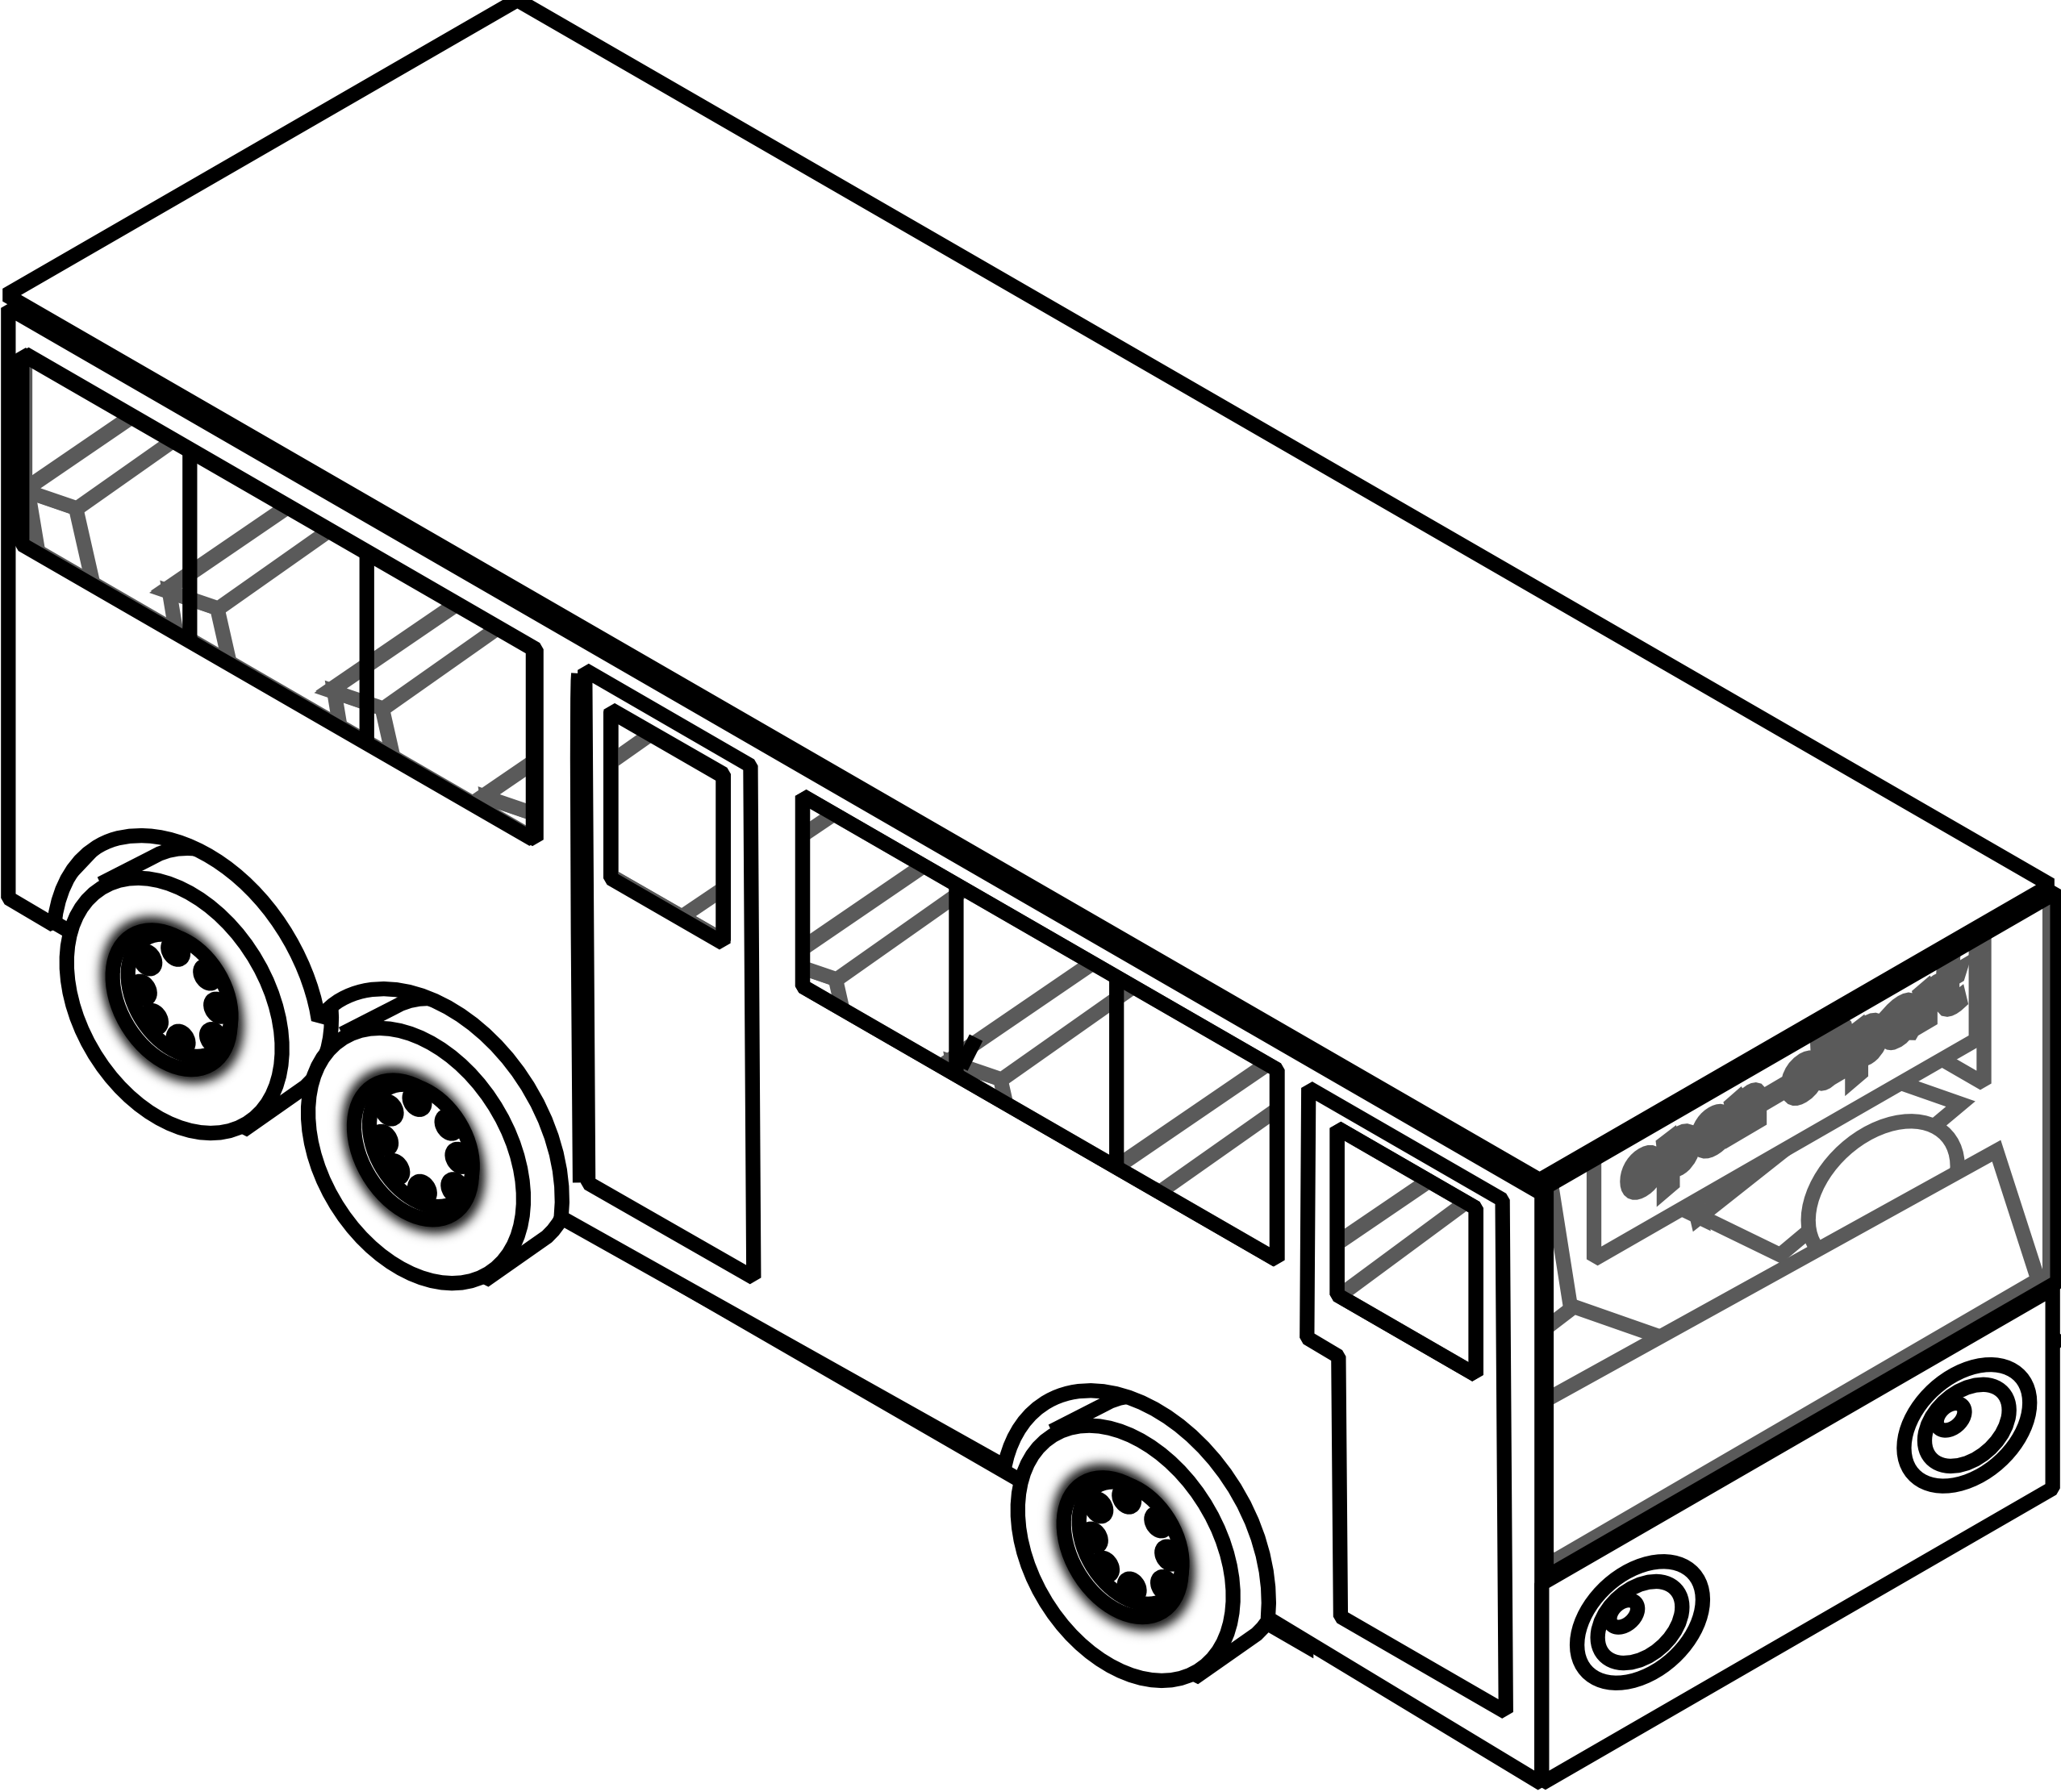 Bus Clipart Black And White Hd Images 3 HD Wallpapers | aduphoto.com